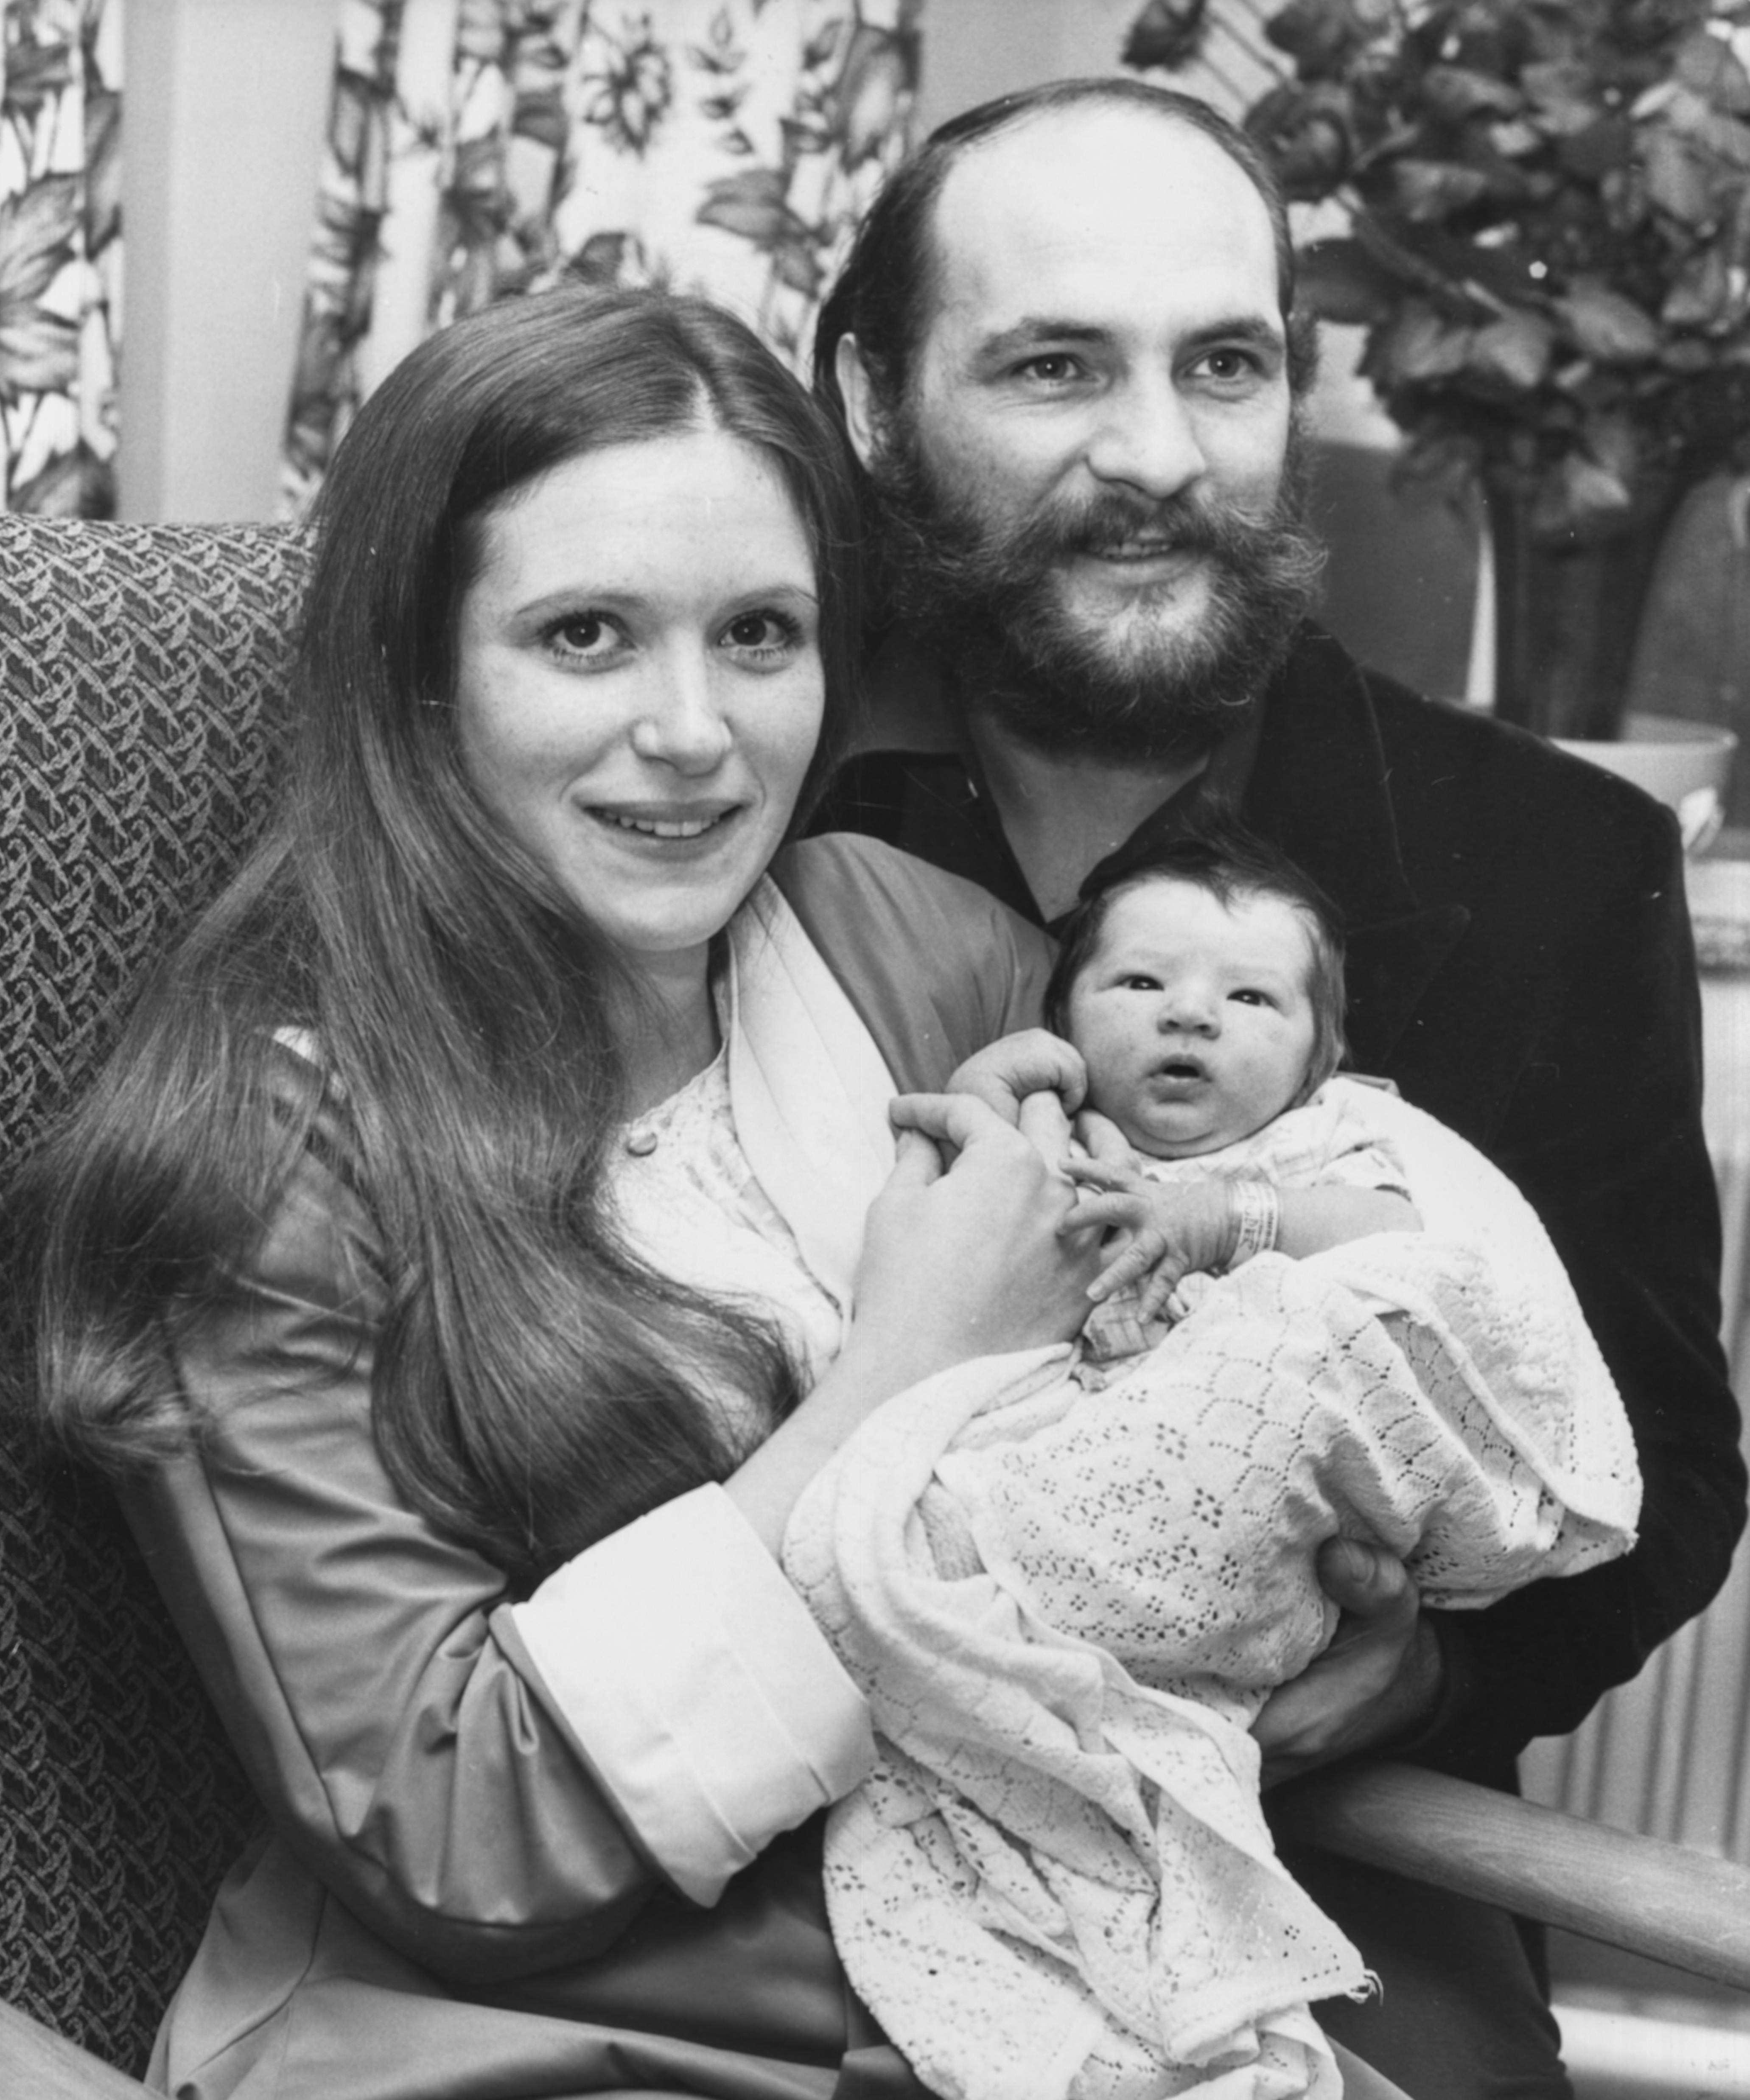 Mike Pinder pictured with his first wife, Donna, and their son, Daniel